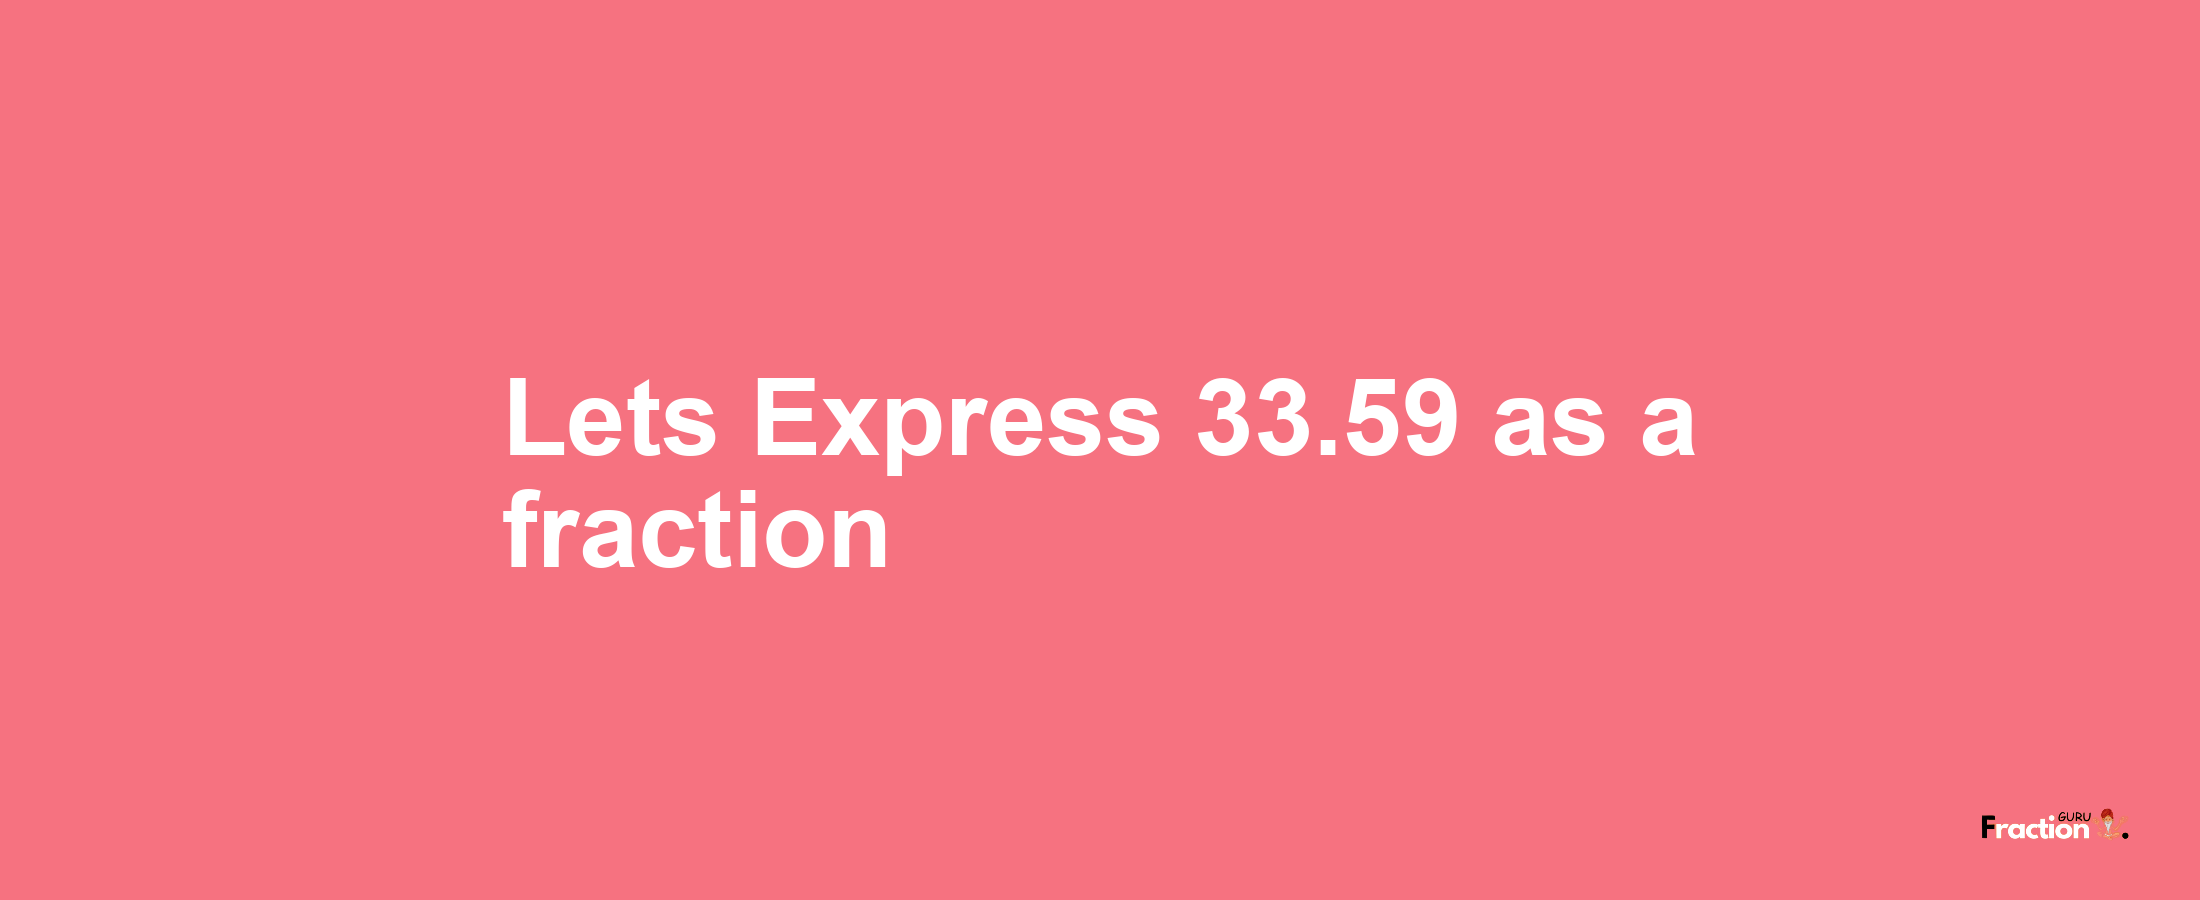 Lets Express 33.59 as afraction